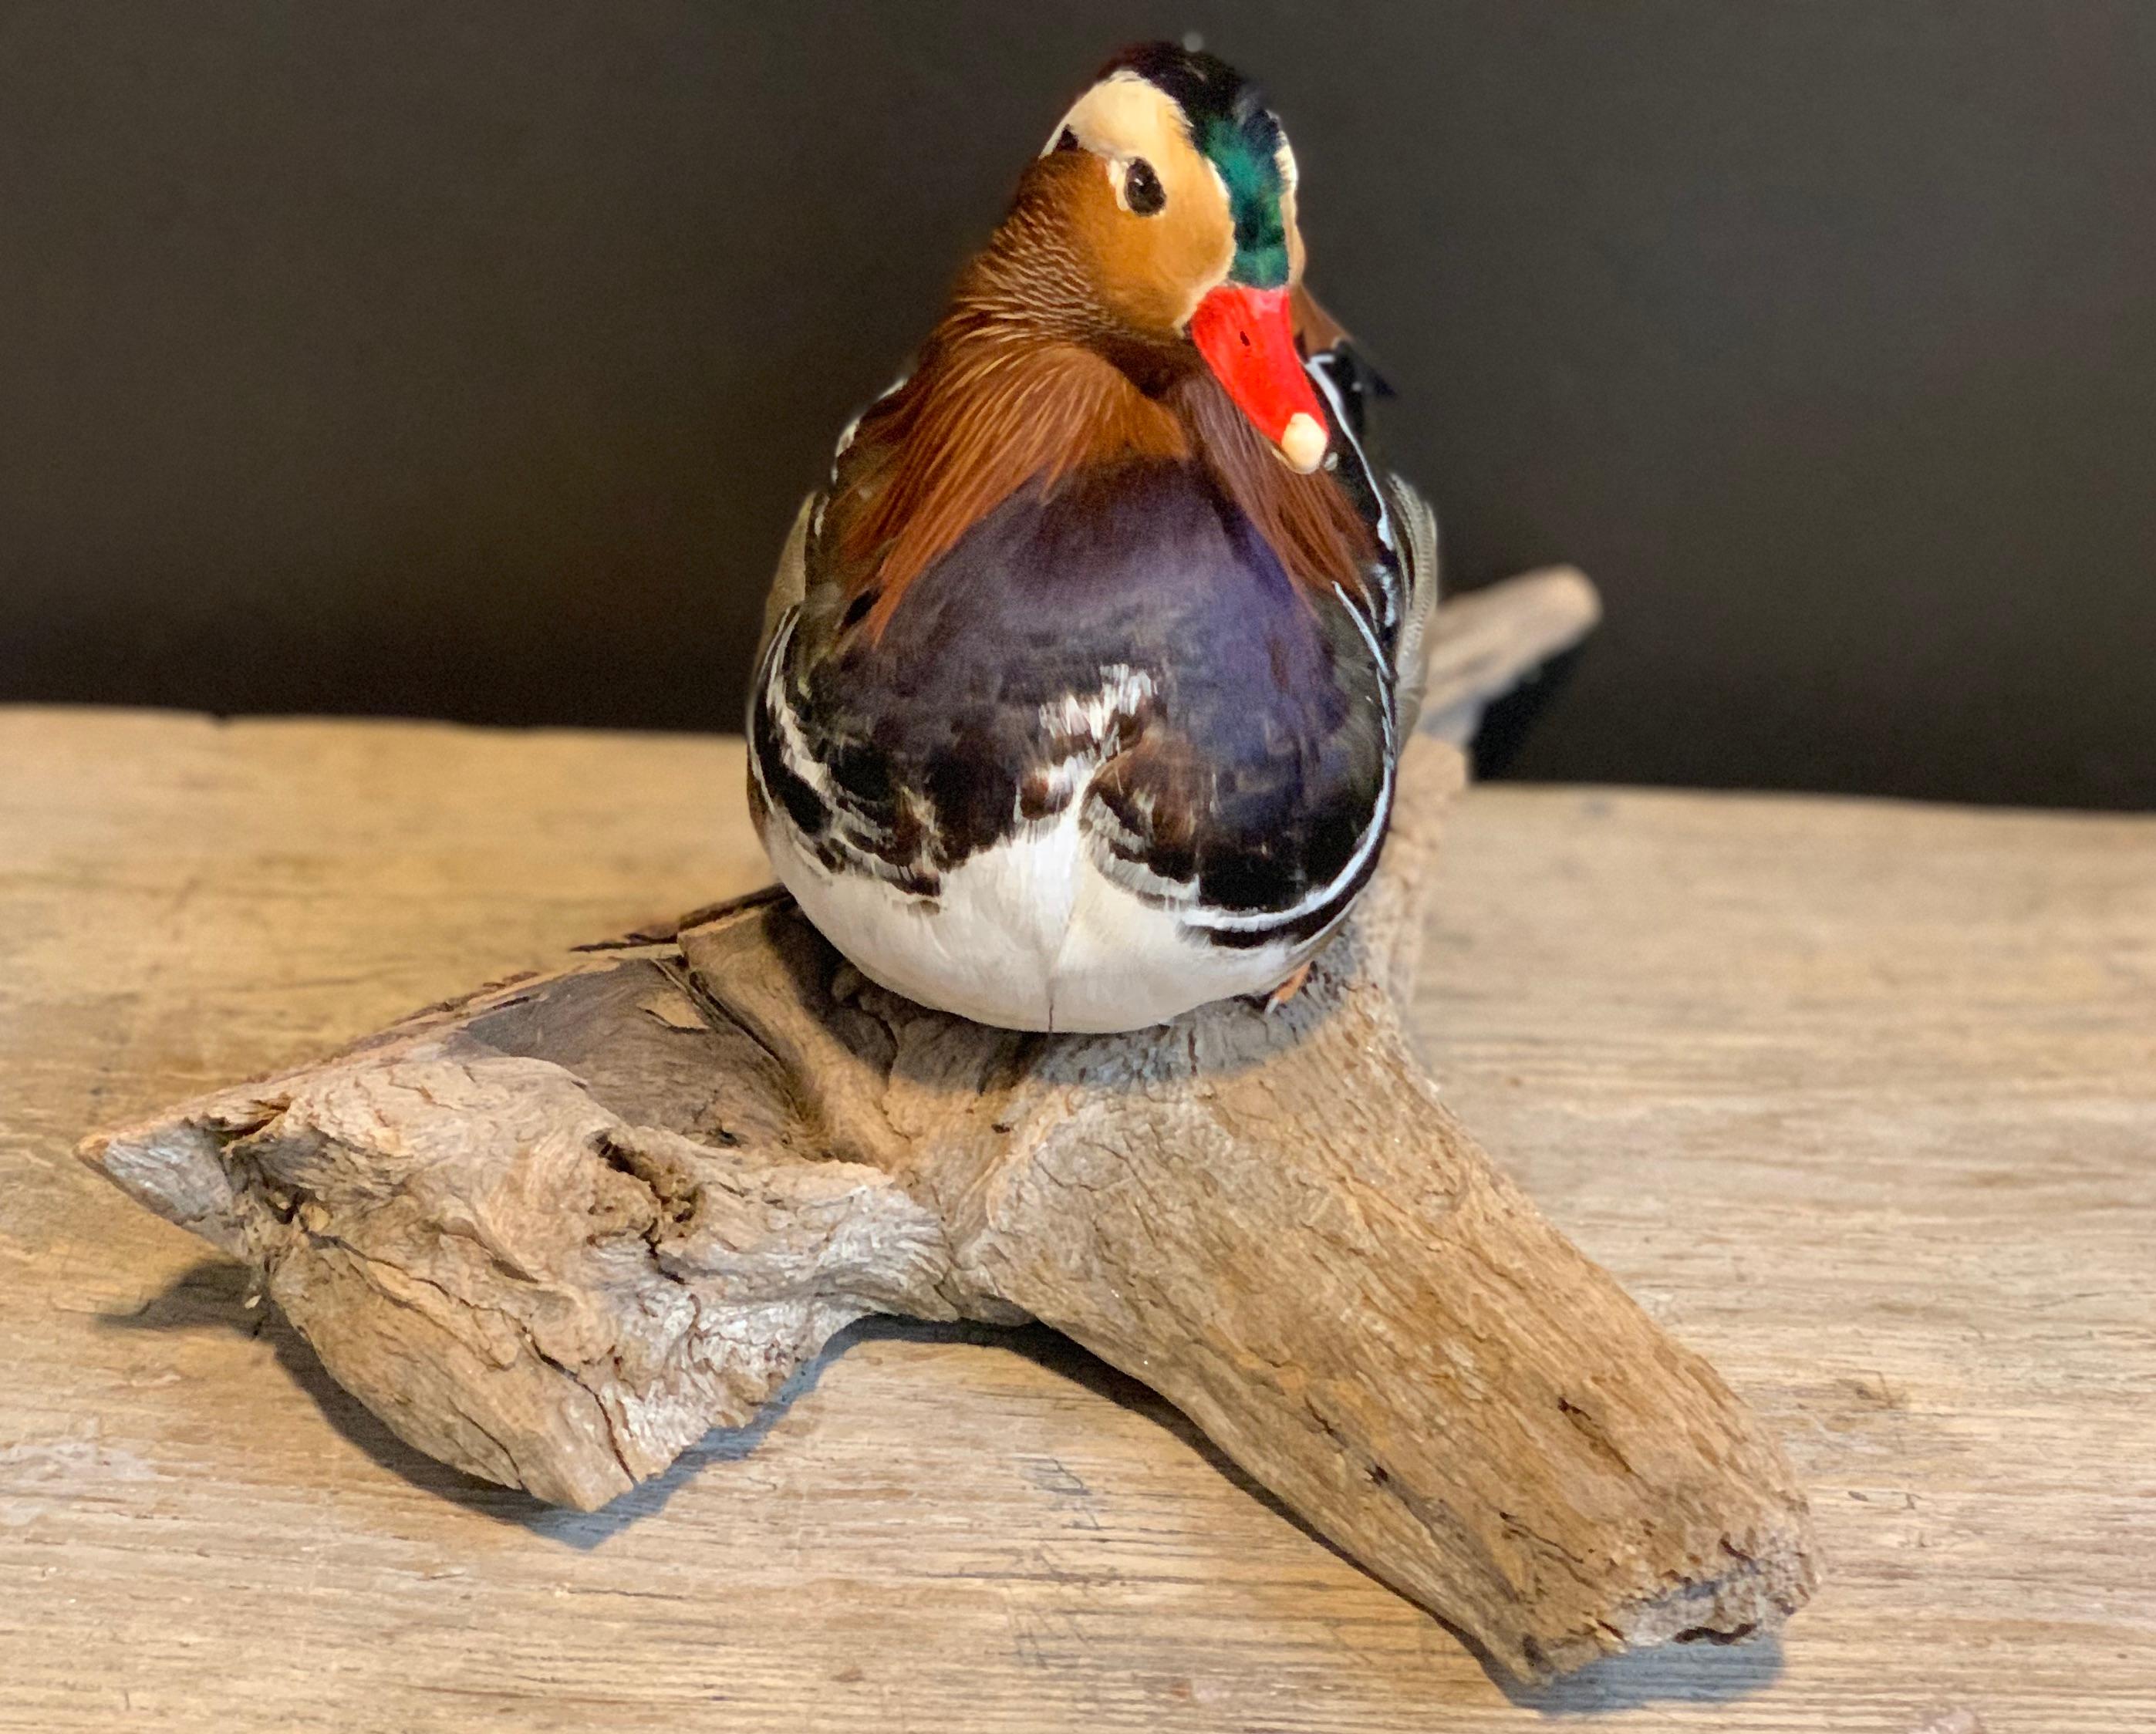 This is a beautiful sitting mandarin taxidermy duck mount.
The feathers and coloration are both very nice with good overall taxidermy quality.
This duck was captive bred.
- This item comes on a driftwooden base
- Perfect for the mantel